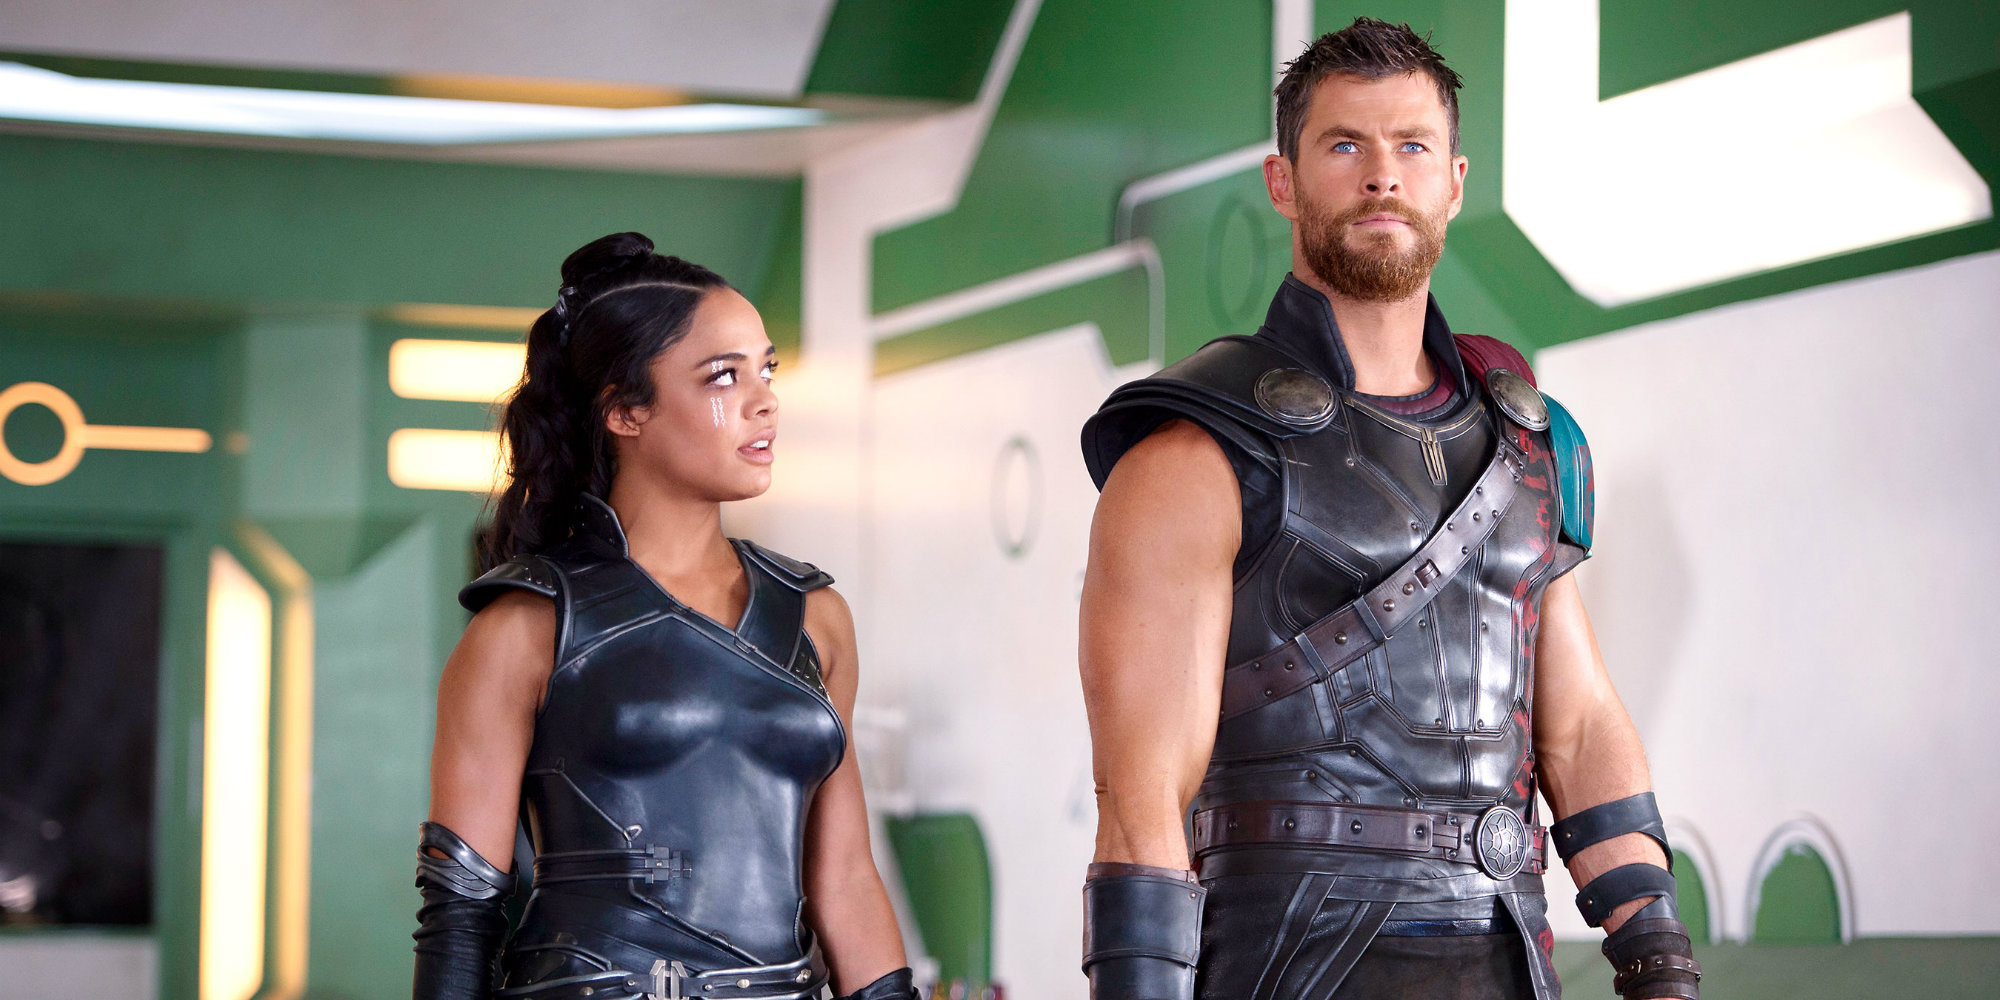 Who Is Valkyrie? 5 Things You Need to Know About the Thor: Ragnarok Femme Fatale